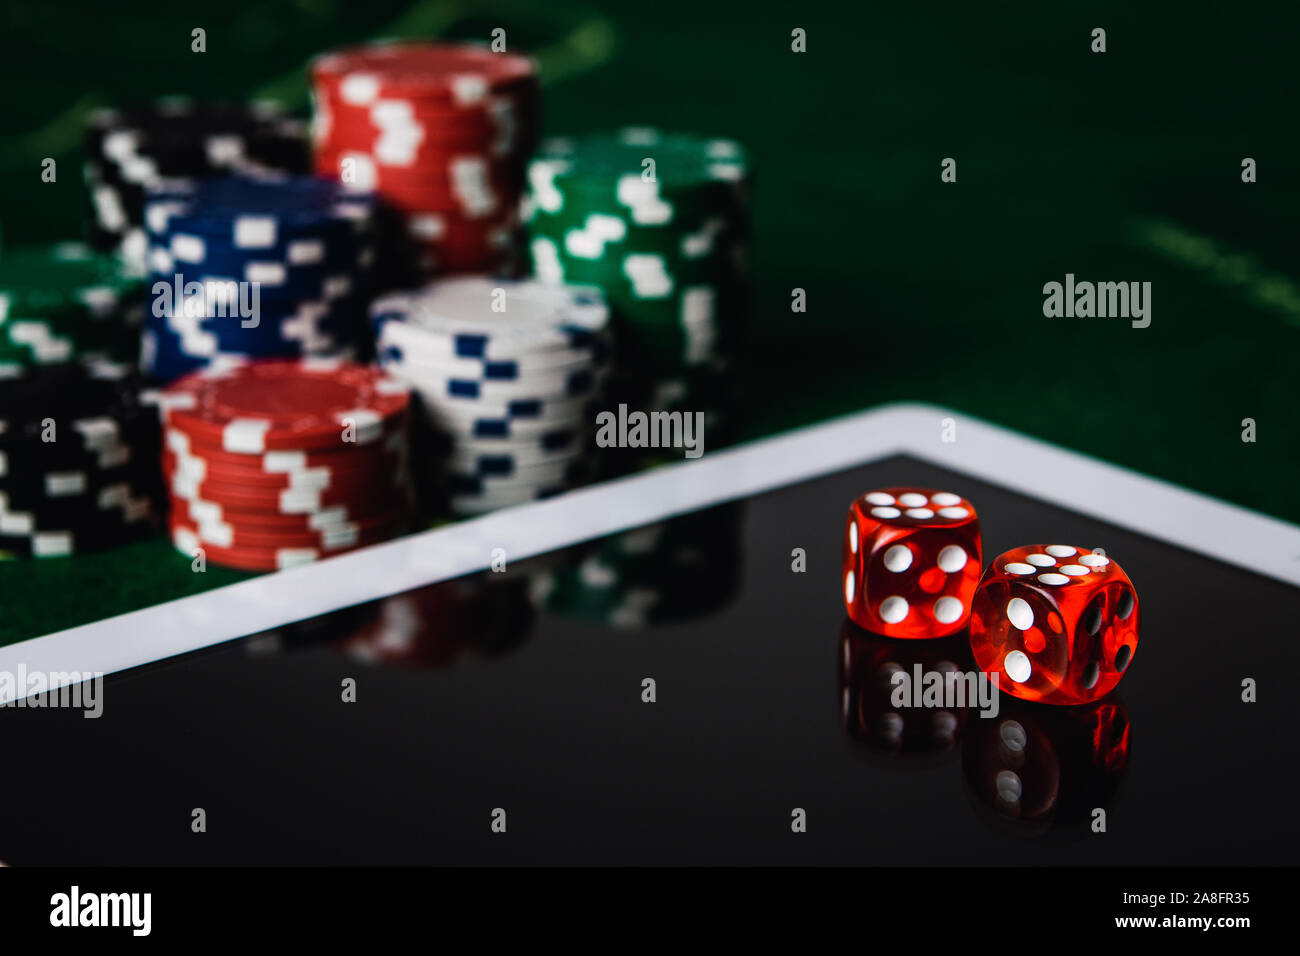 Online gaming and gambling concept. Green felt, digital tablet, red dices and poker chips Stock Photo